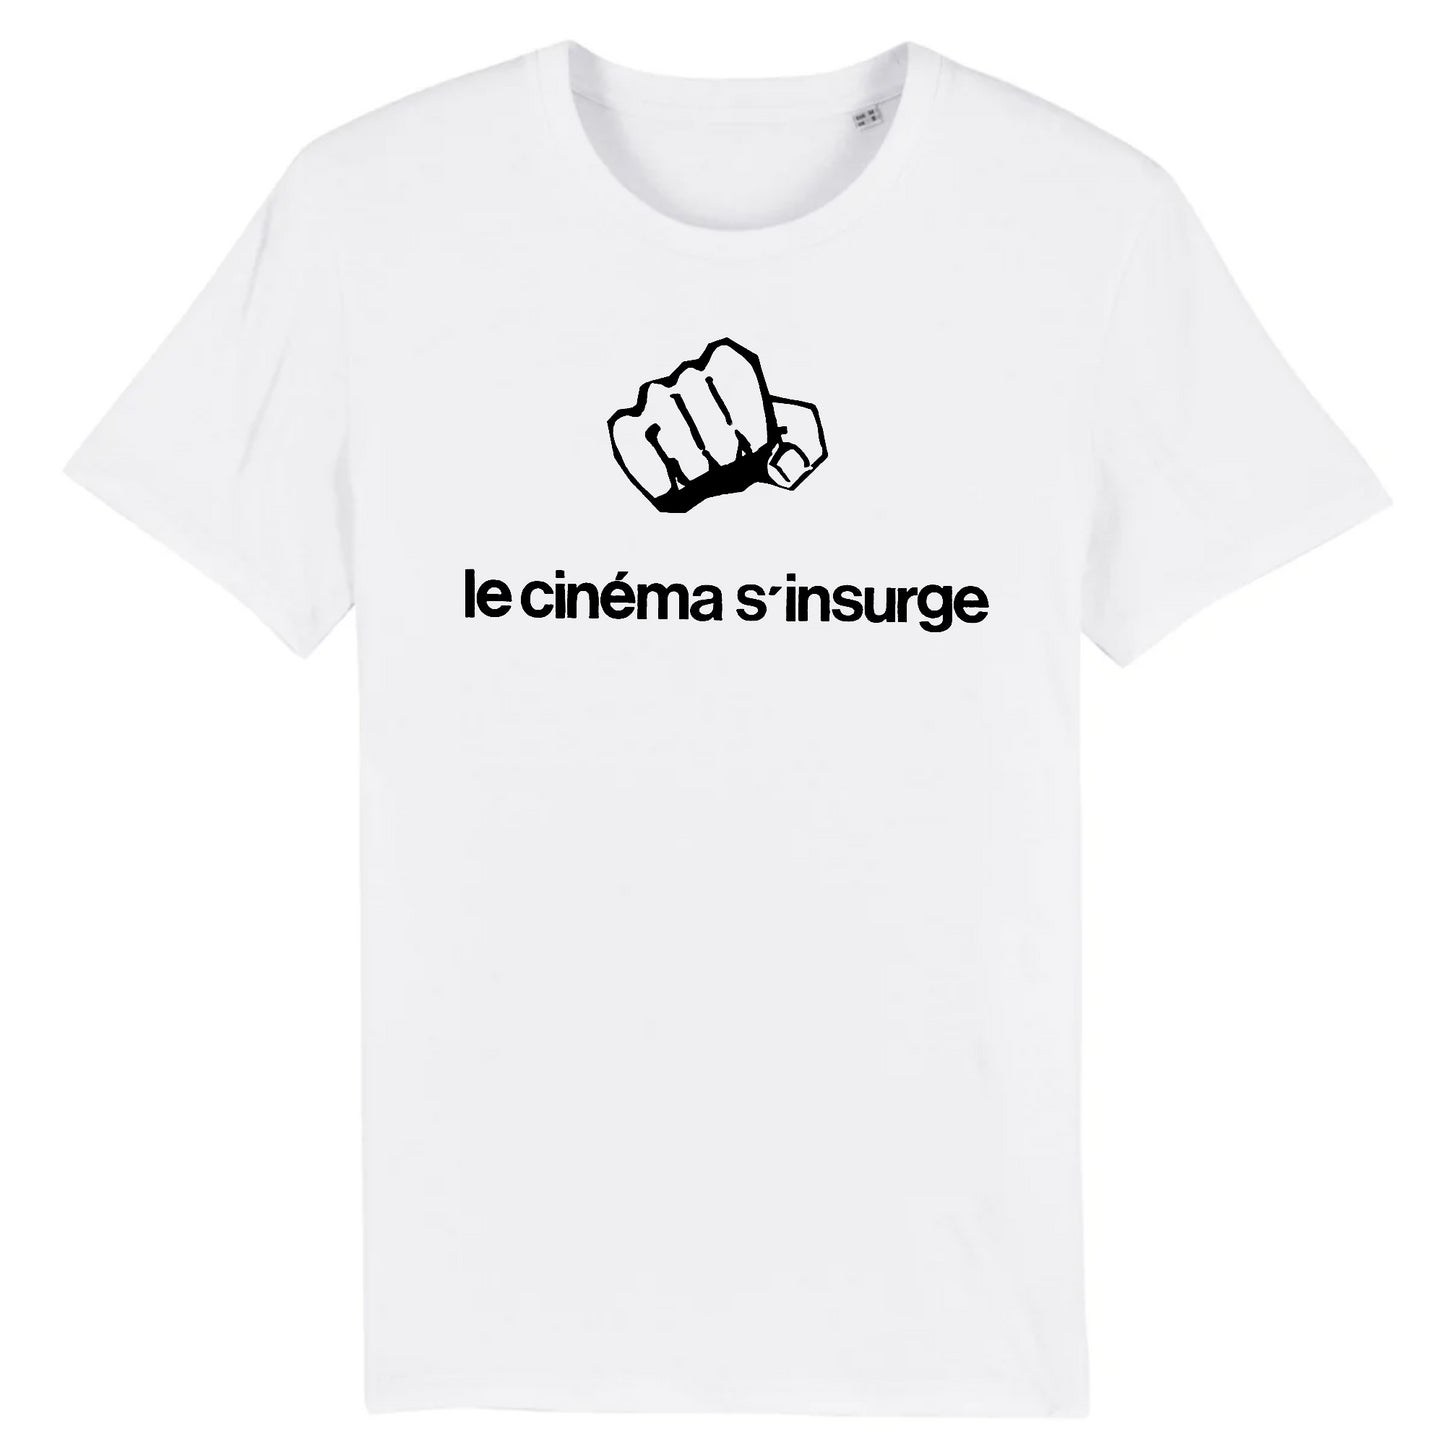 Cinema S'Insurge (Cinema Rises Up), poster design issued by radical Paris university cinema students in the wake of the upheavals of May 1968 - Organic Cotton T-Shirt